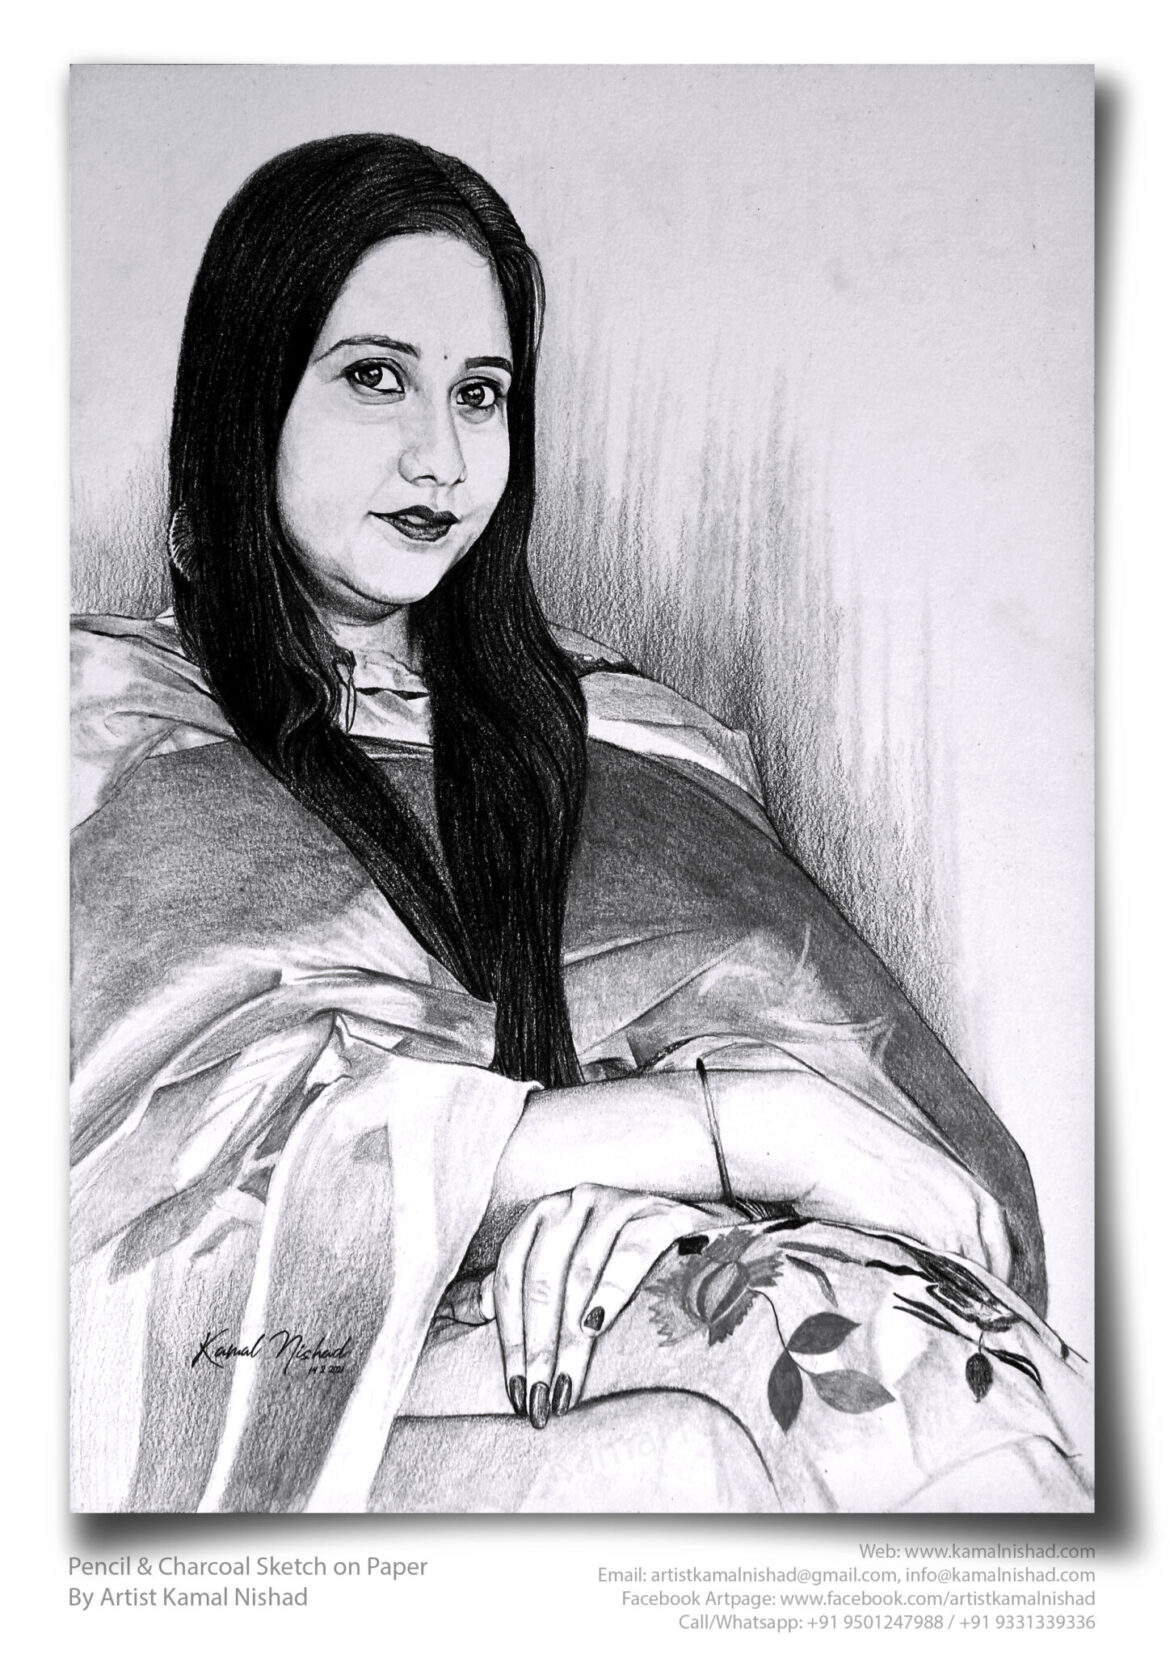 A CALM SMILE | Pencil & Charcoal Sketch Title : A CALM SMILE Medium : Pencil & Charcoal Sketch Size : A3 Paper size (Sketch size 29.7 x 42.0 cm*) Artist : Kamal Nishad This is a Handmade/hand-drawn Sketch made with Pencil & Charcoal “A CALM SMILE”. This is a Gift from One of my Client to her friend. 💐 SIZE: Paper size A3 (work area 11.7 x 16.5 inches *estimated) Created by © Kamal Nishad. All rights reserved.